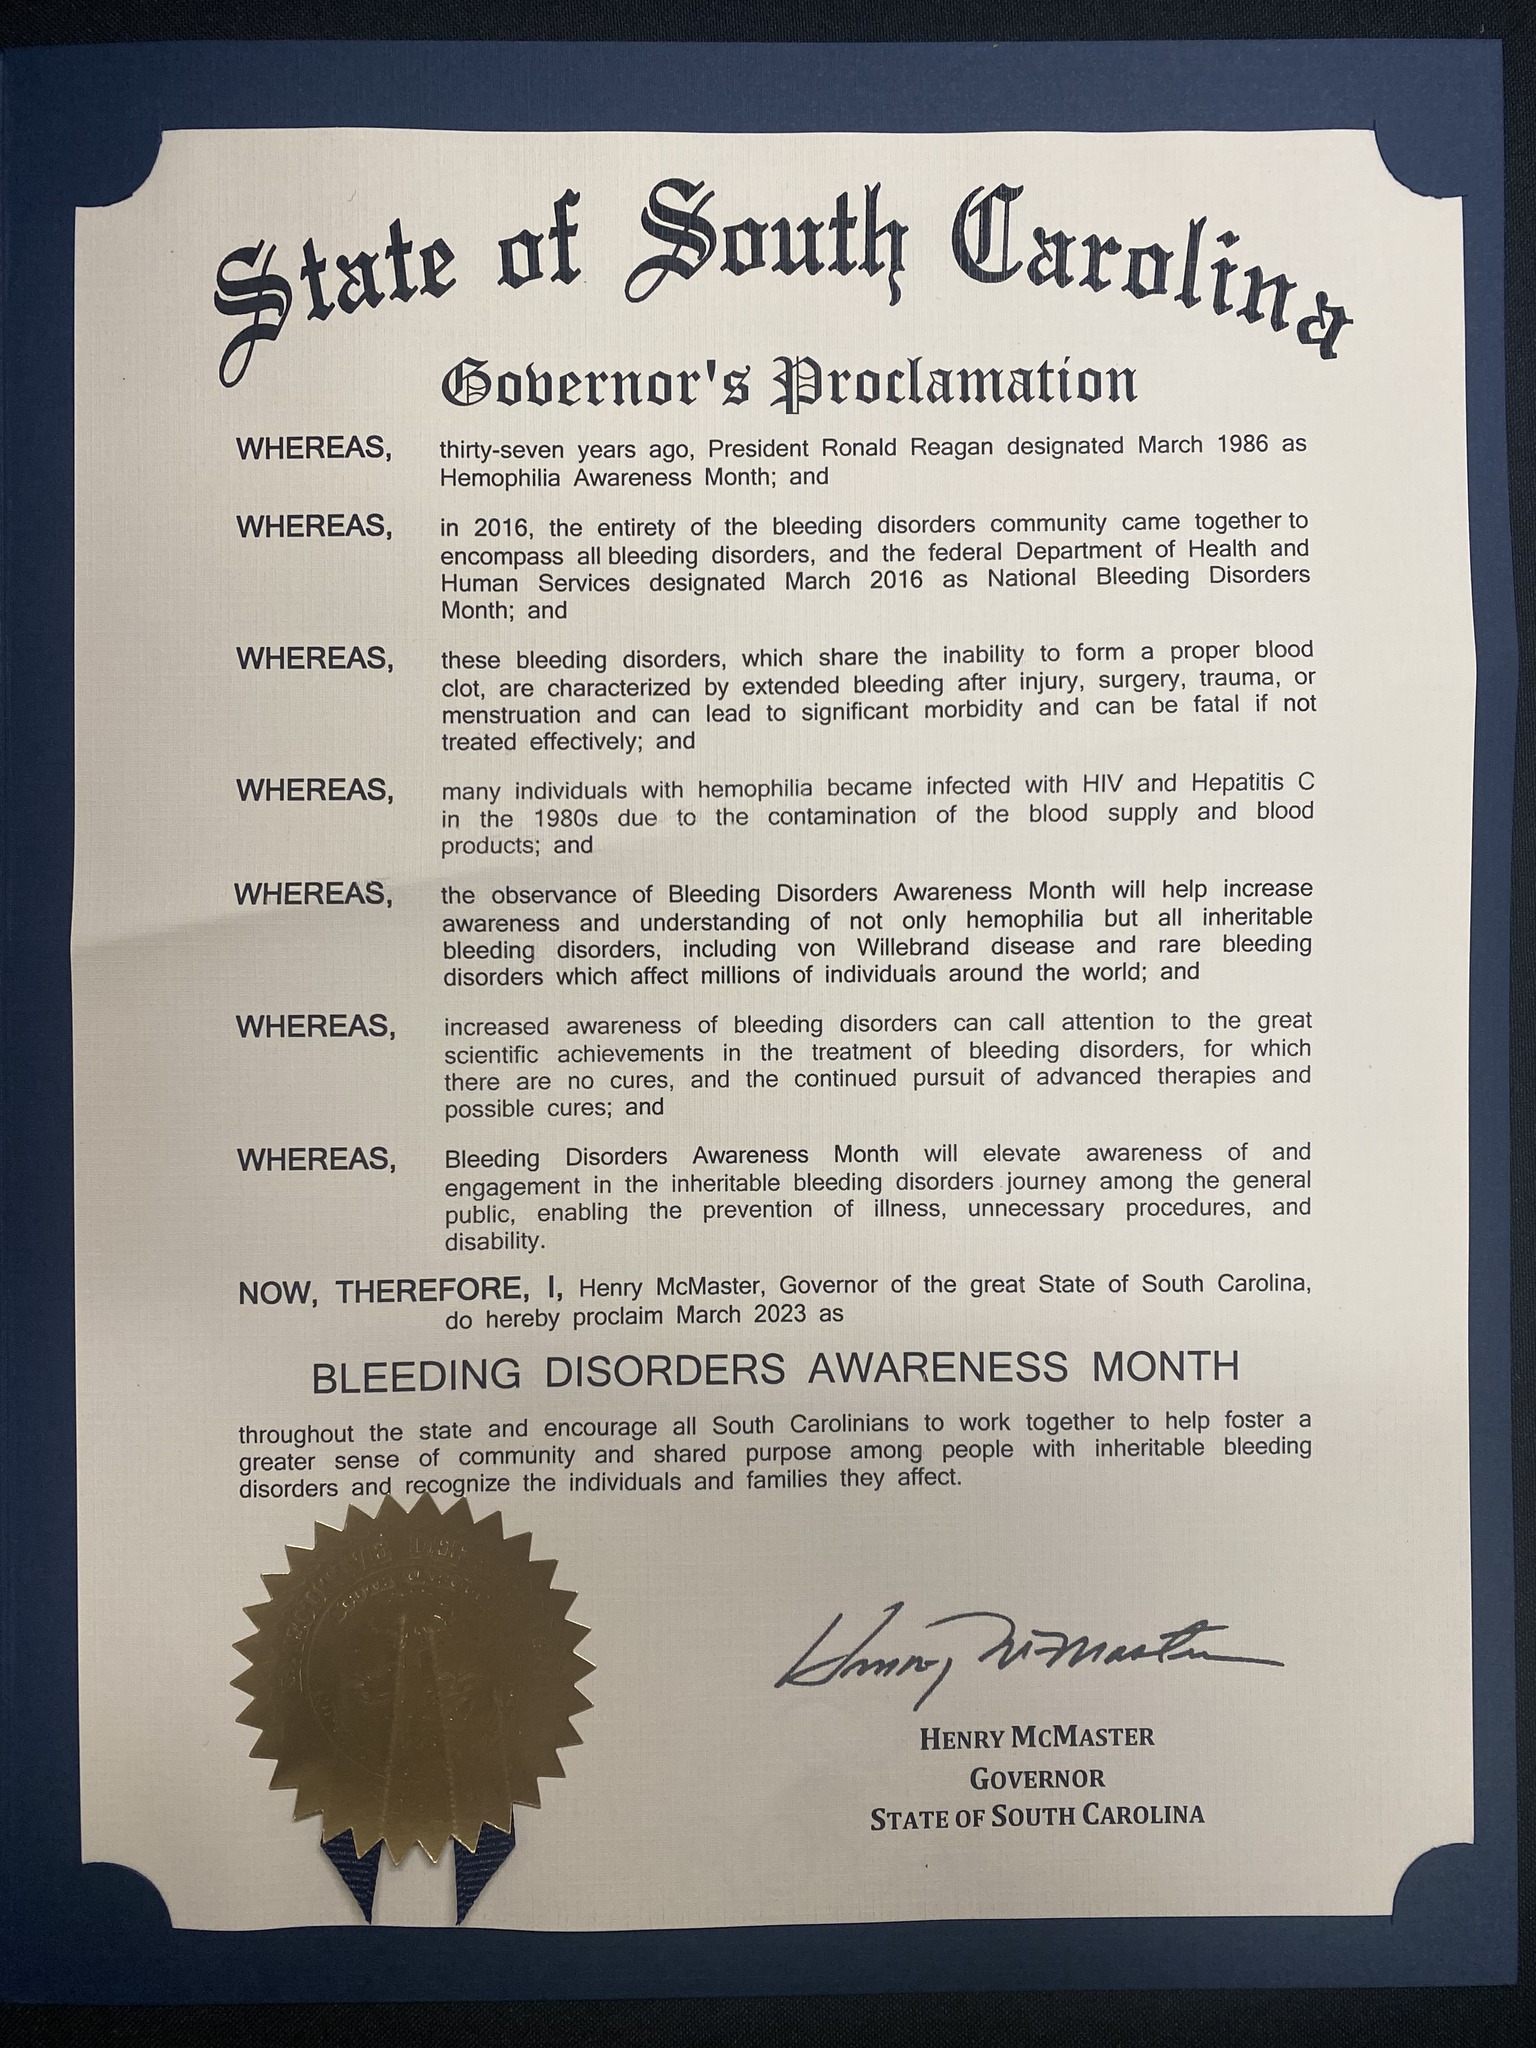 Our 2023 State of South Carolina Bleeding Disorder Awareness Month Proclamation